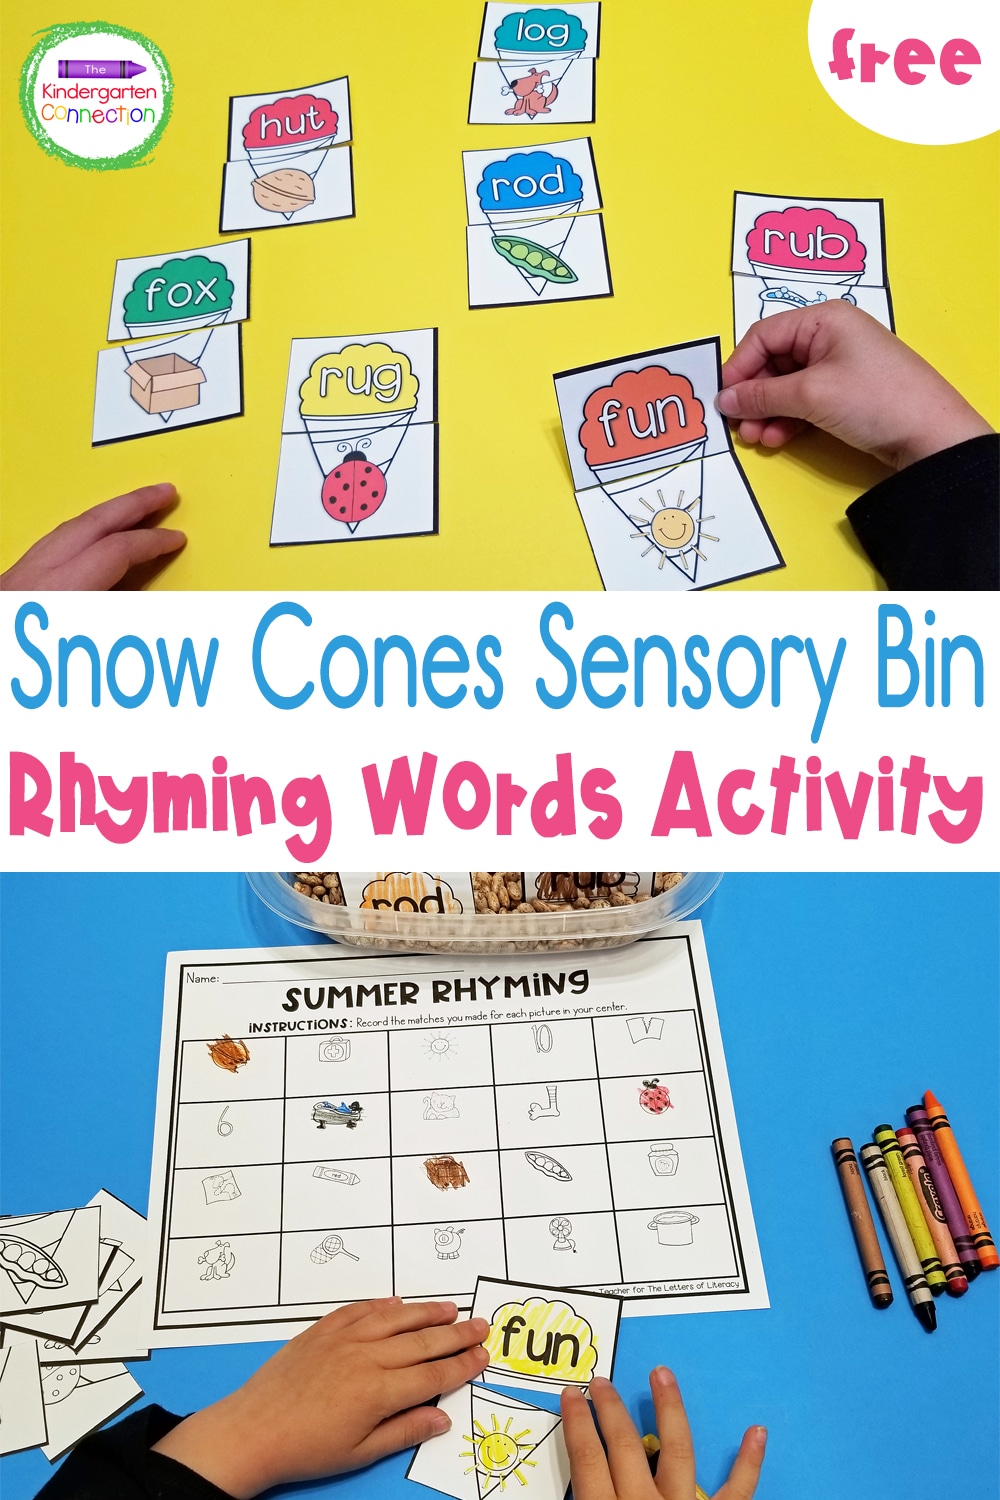 This free Snow Cones Rhyming Words Activity is a fun way to keep your early learners engaged and excited to practice their rhyming skills!